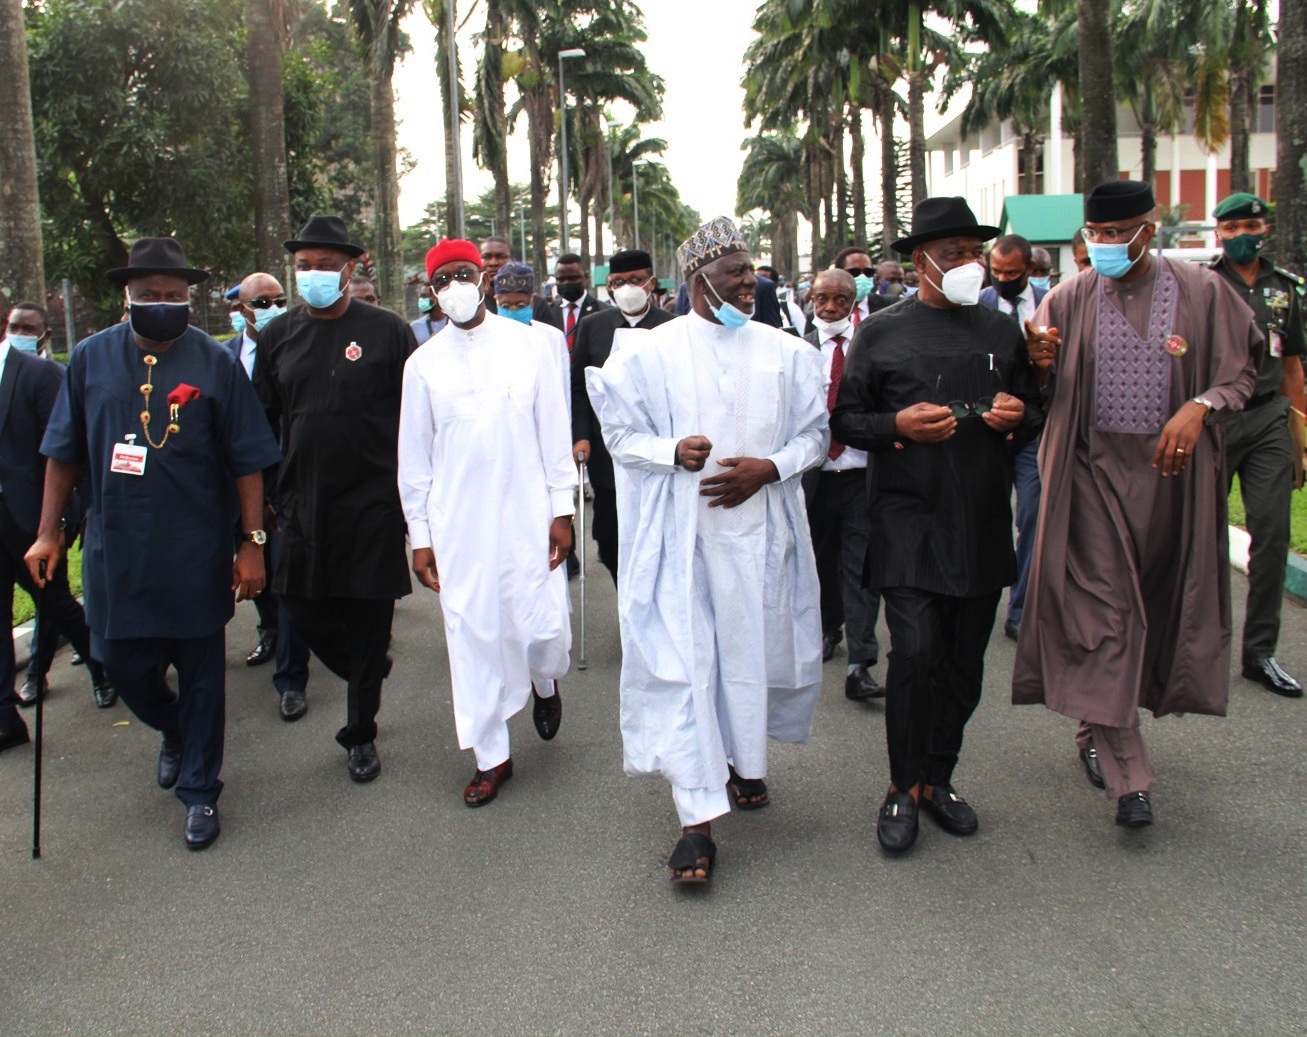 Representative of the President, and Chief of Staff to the President,Ambassador Ibrahim Gambari (3rd right); Deputy Senate President , Ovie Omo-Agege (right); Delta Governor, Senator Dr. Ifeanyi Okowa (3rd left); Rivers State Governor, Barr. Nyesom Wike (2nd right); Bayelsa State Governor, Senator Douye Diri and others, during the South-South Leaders Meeting with the Presidential delegation held in Government House, Port Harcourt, Rivers State on Tuesday, November 24, 2020 (Pix: Jibunor Samuel)